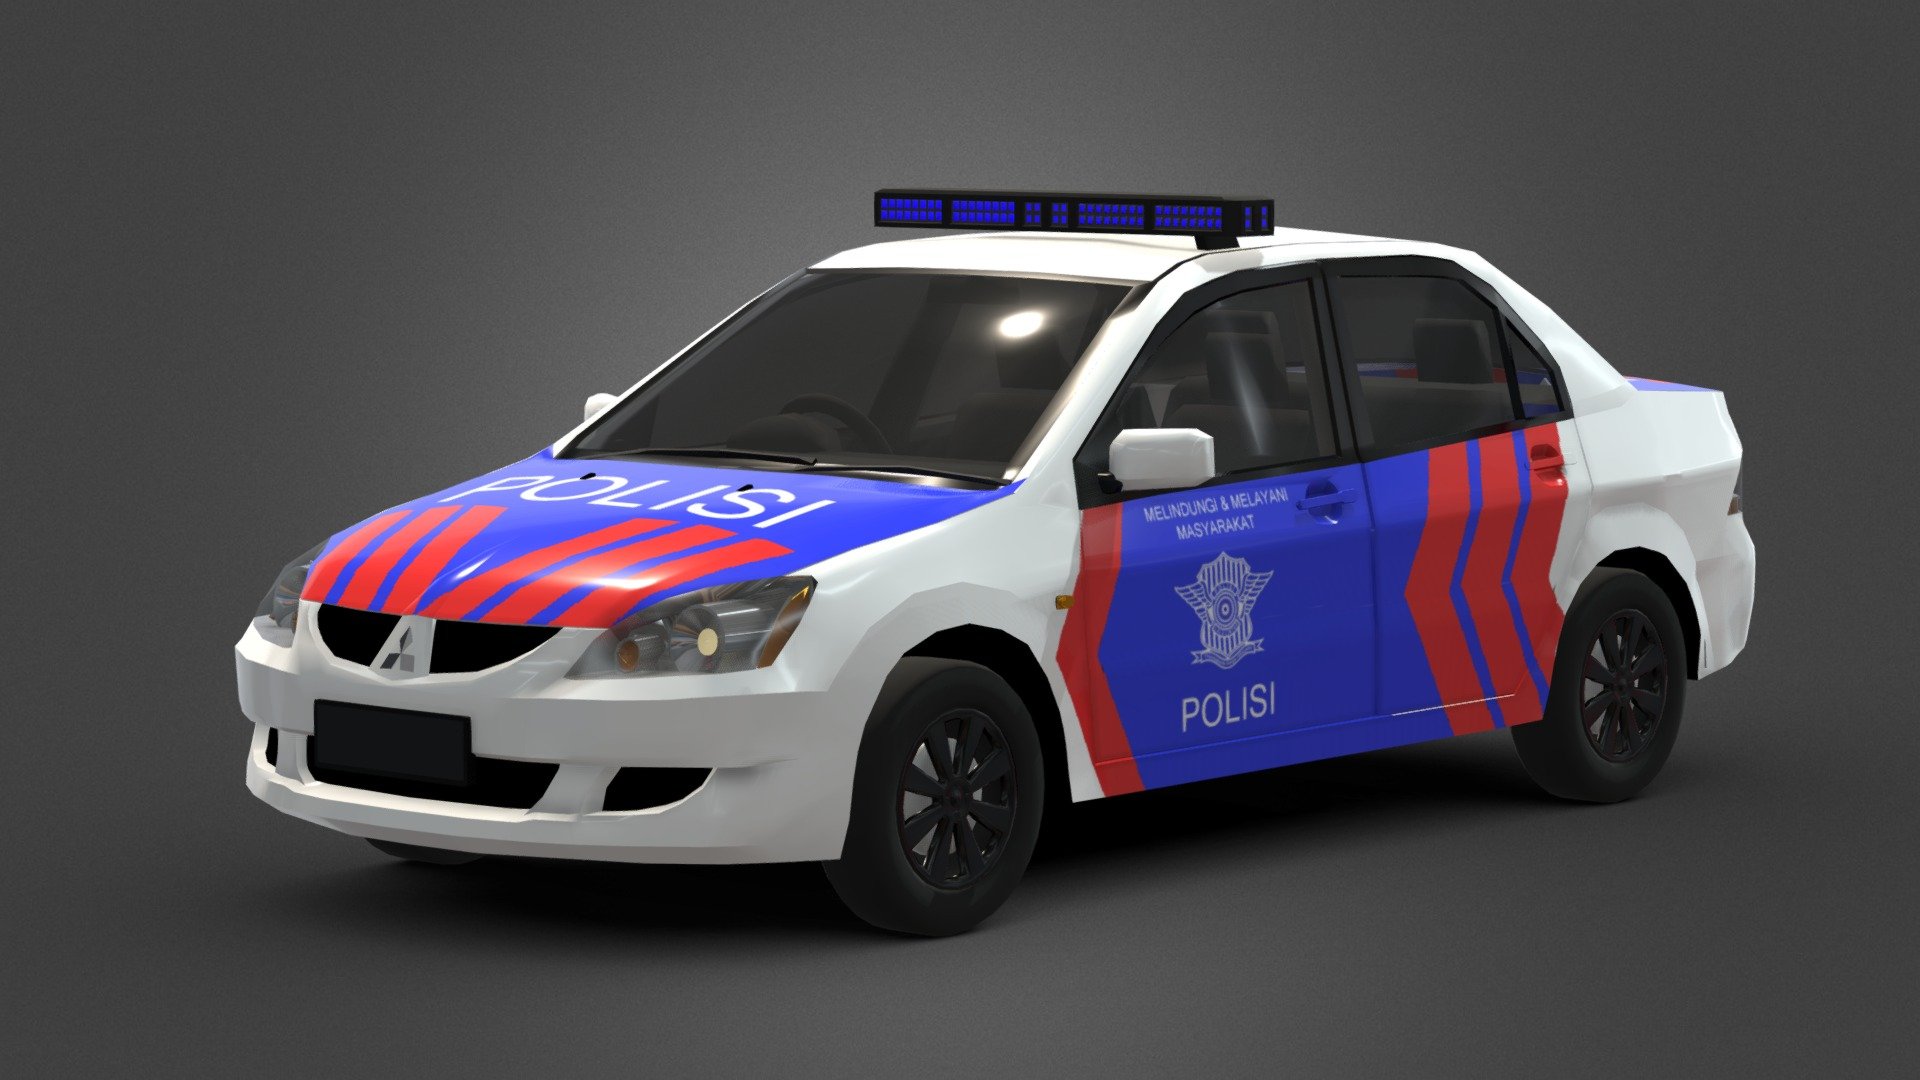 Indonesian Police Car based of Mitsubishi Lancer Cedia - Indonesia Police Car - Buy Royalty Free 3D model by Han66st 3d model